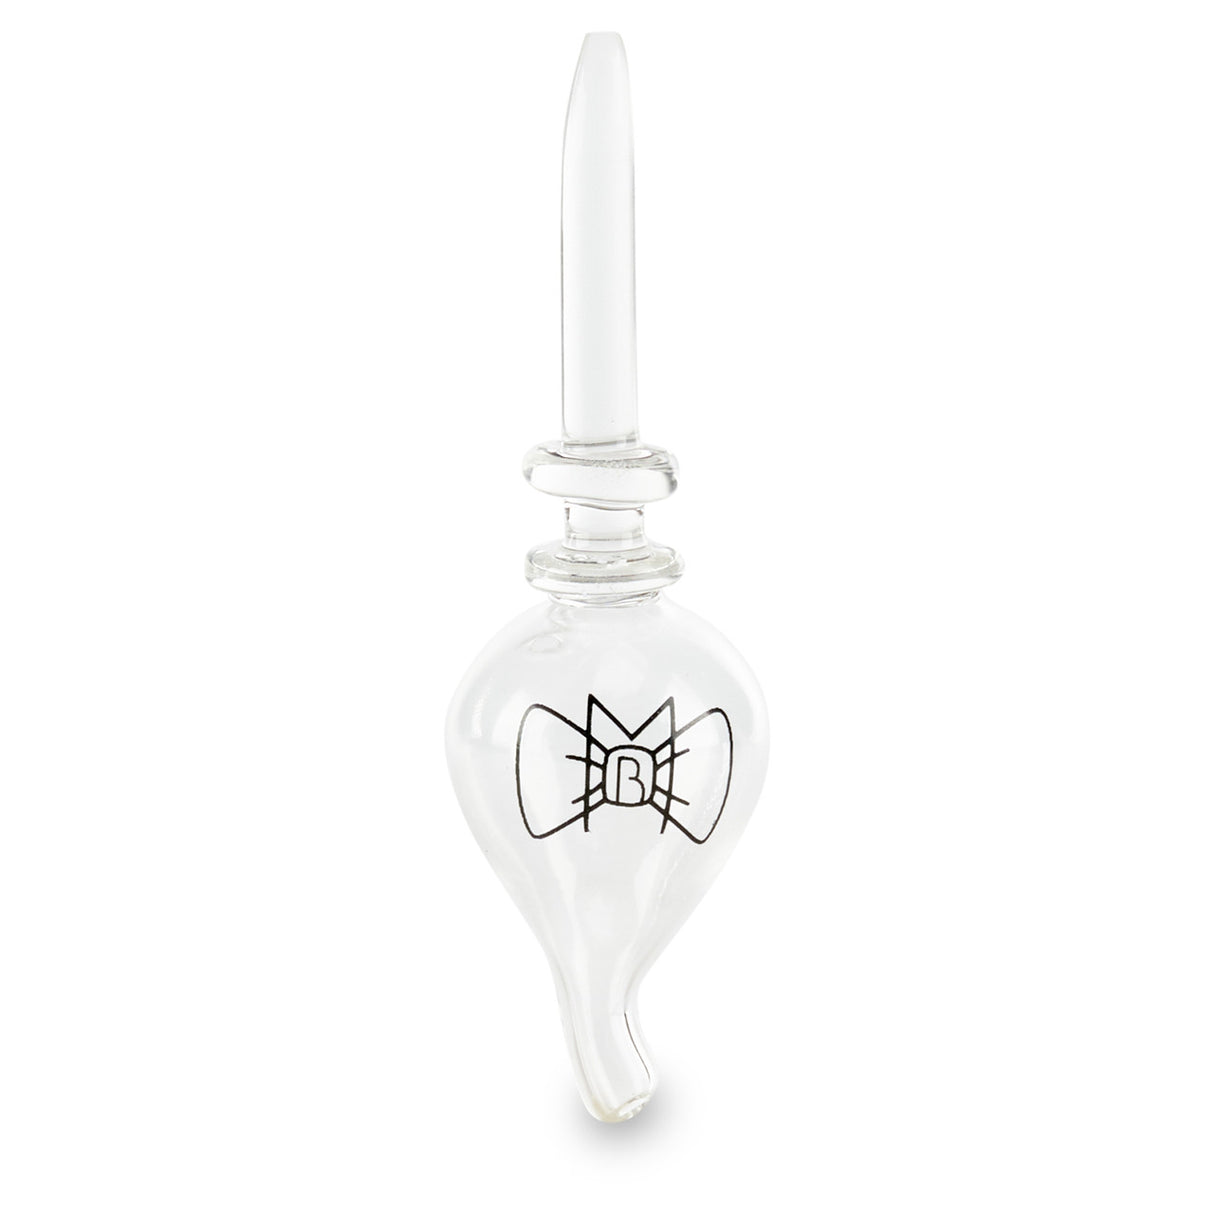 Mob Glass 2-in-1 Dab Tool and Carb Cap